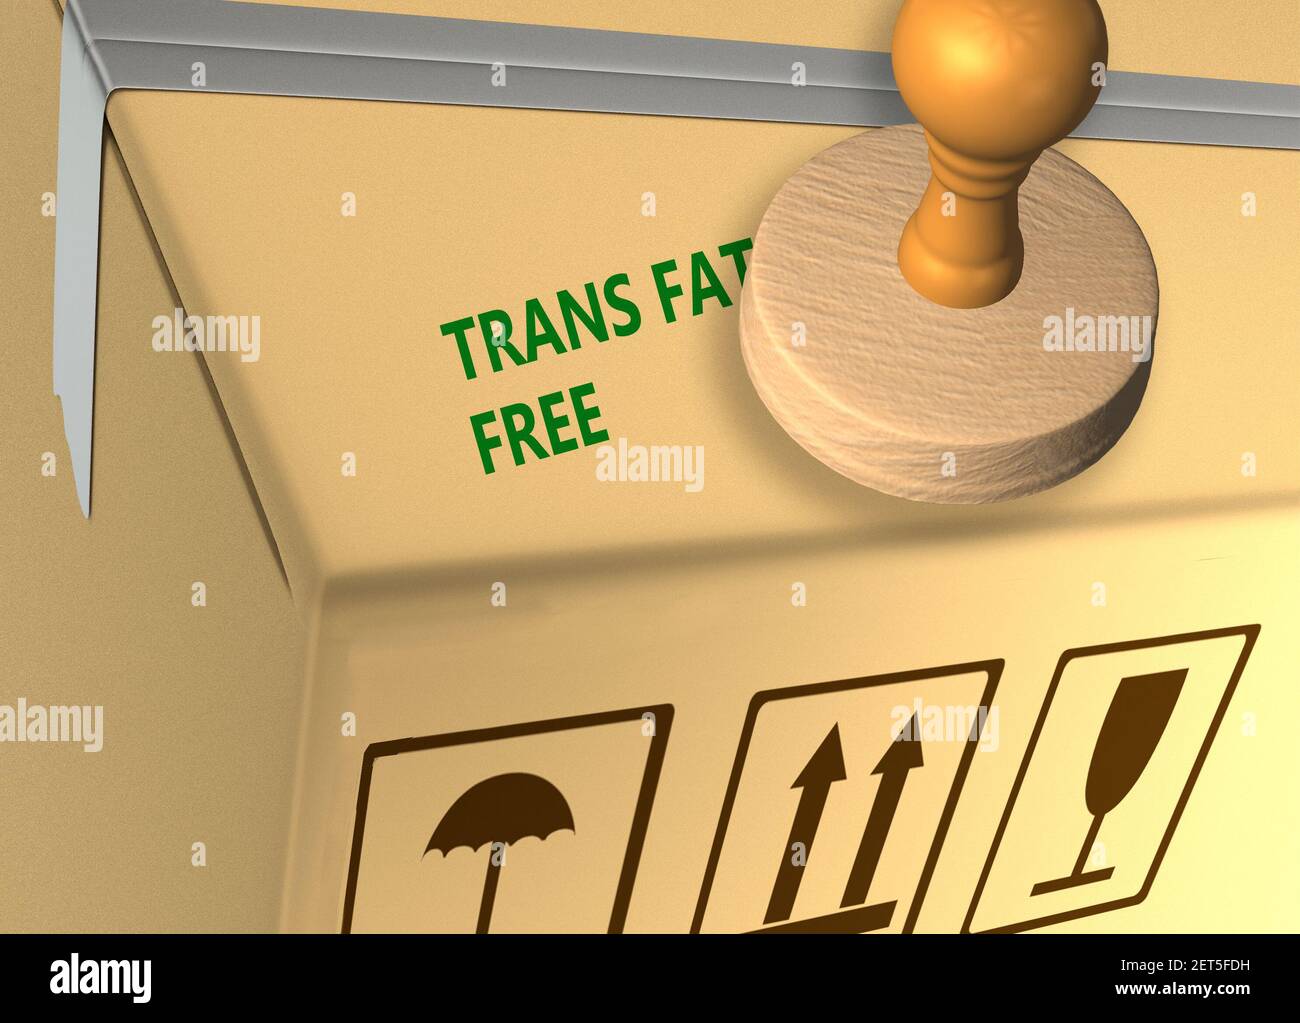 3D illustration of TRANS FAT FREE stamp title on a merchandise carton Stock Photo